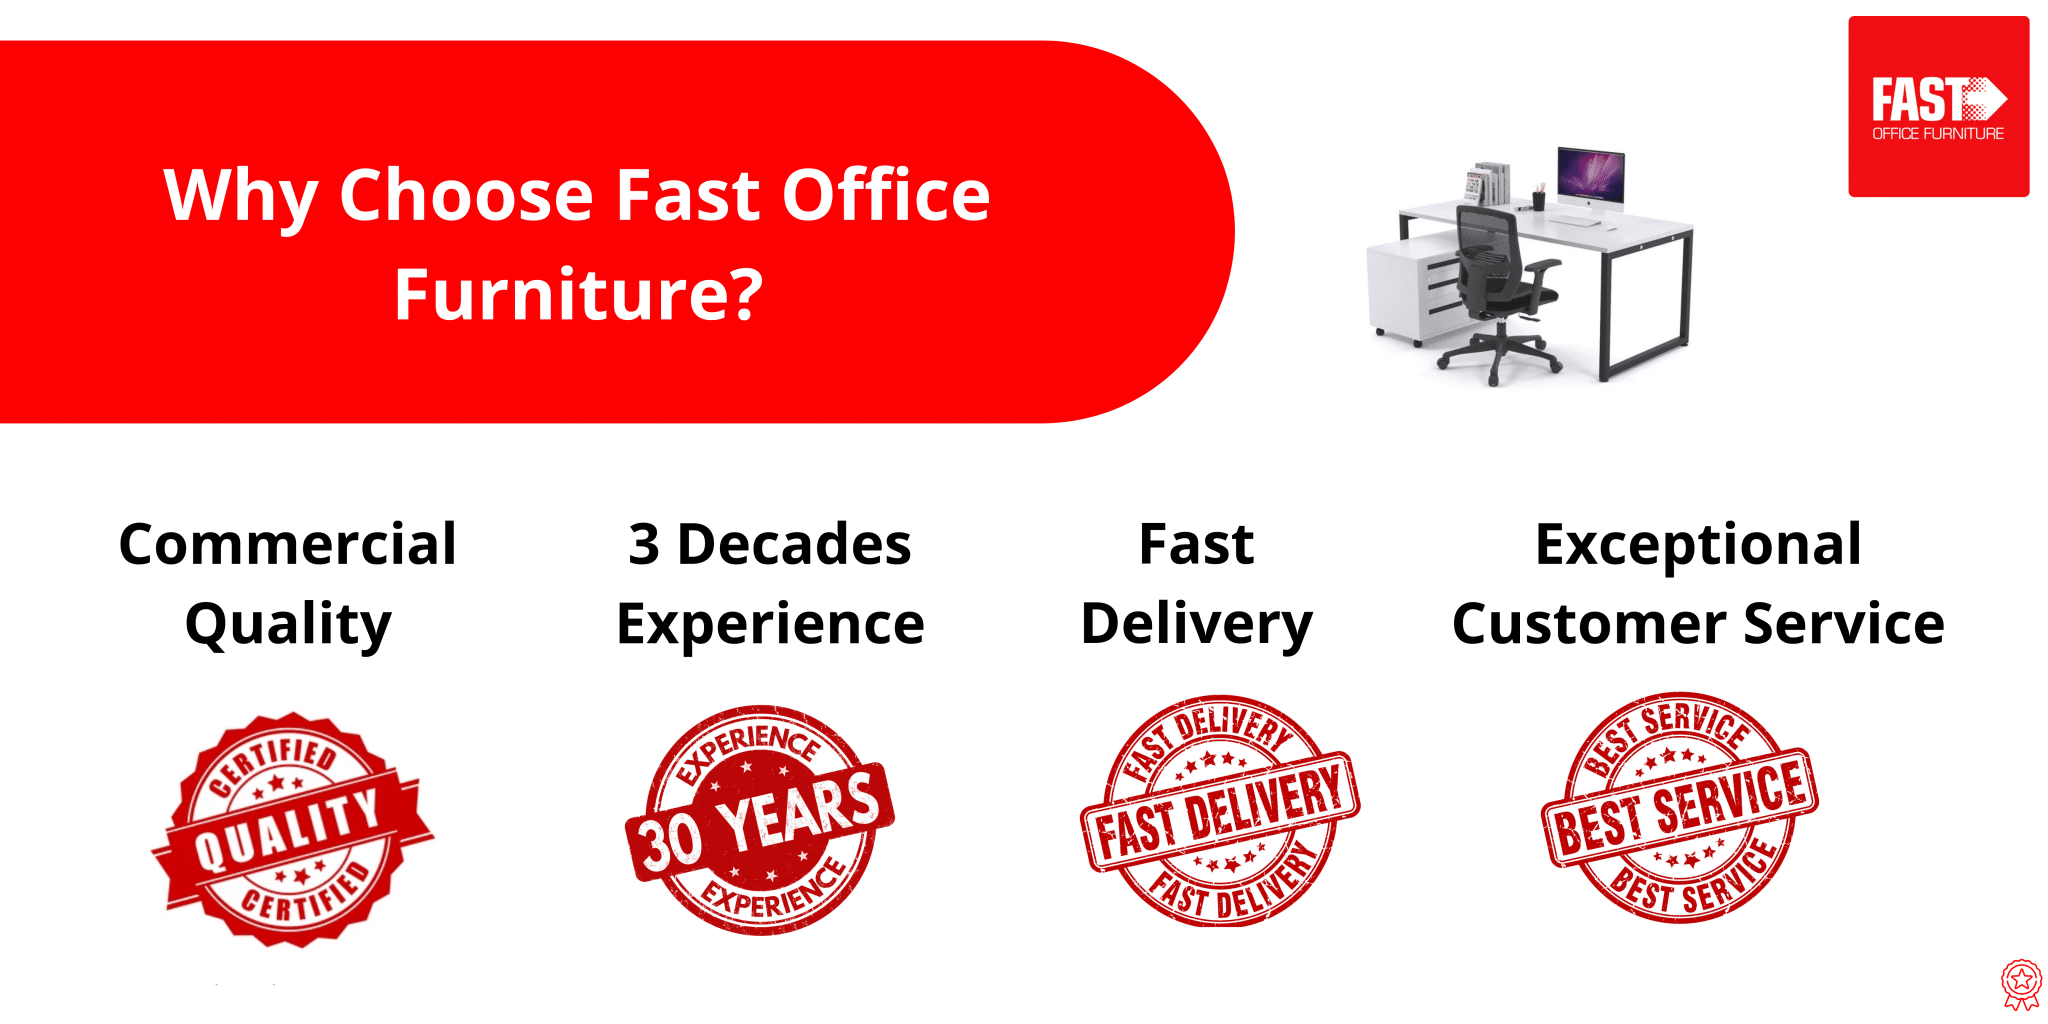 Why Choose Fast Office Furniture